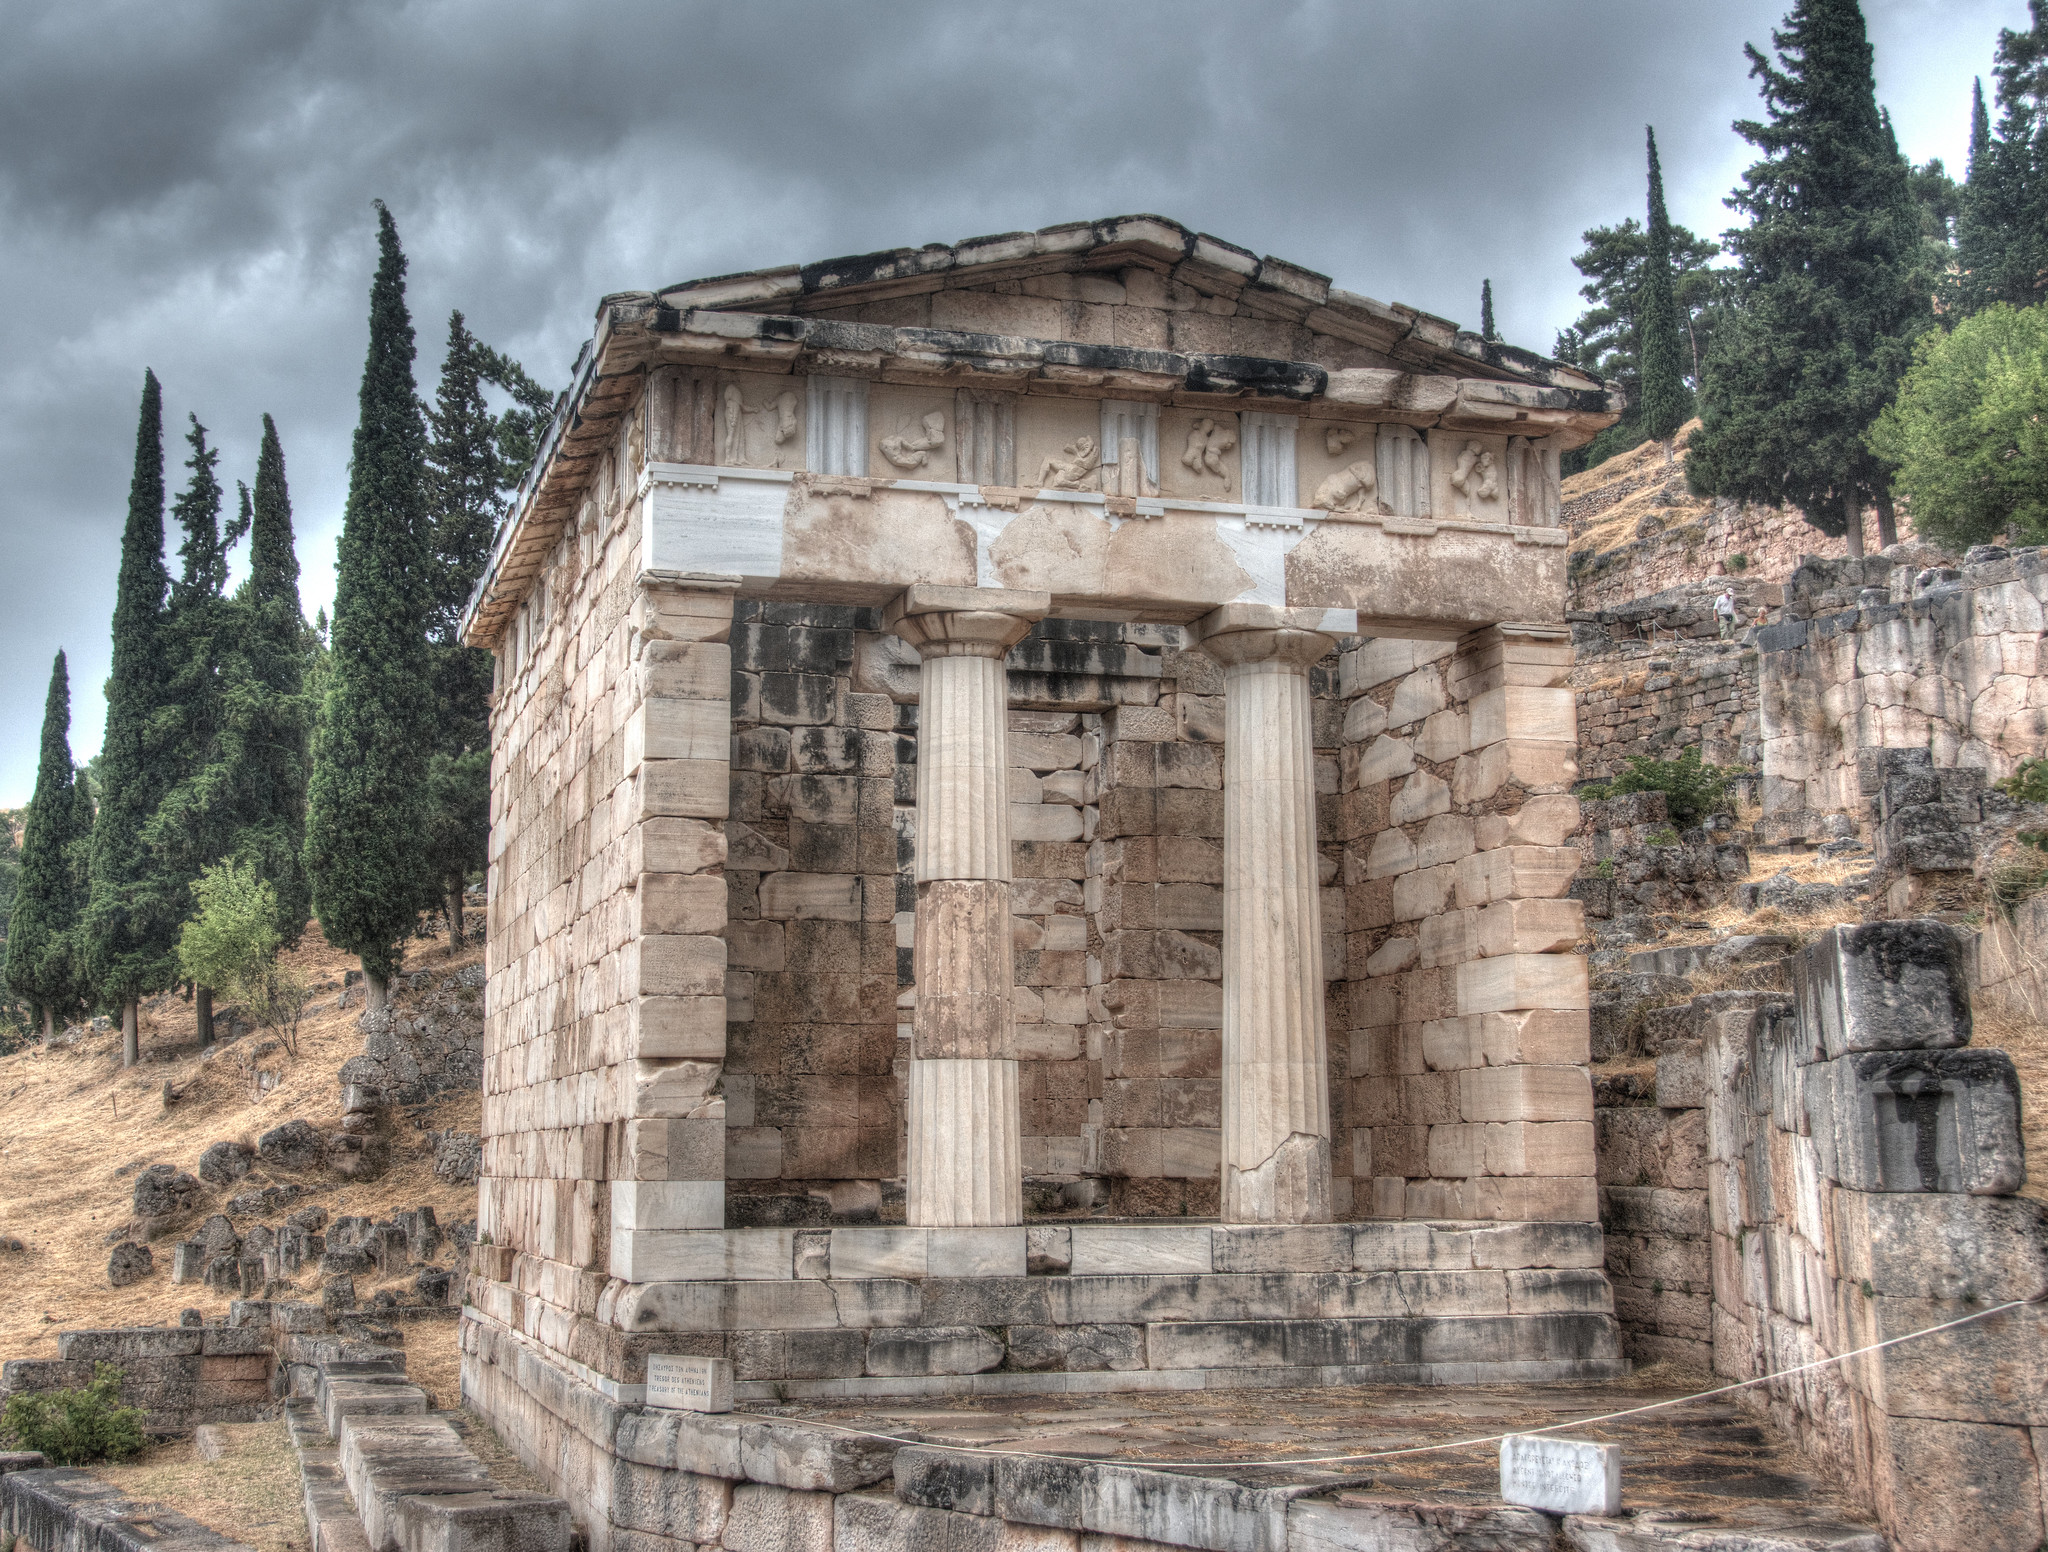 Archaeological remains of the Athenian treasury on the hillside at Delphi. It is a small square buildings with walls on three sides, and open with two columns at the front. The columns are partially reconstructed. The metopes are decorated with reliefs of figures.